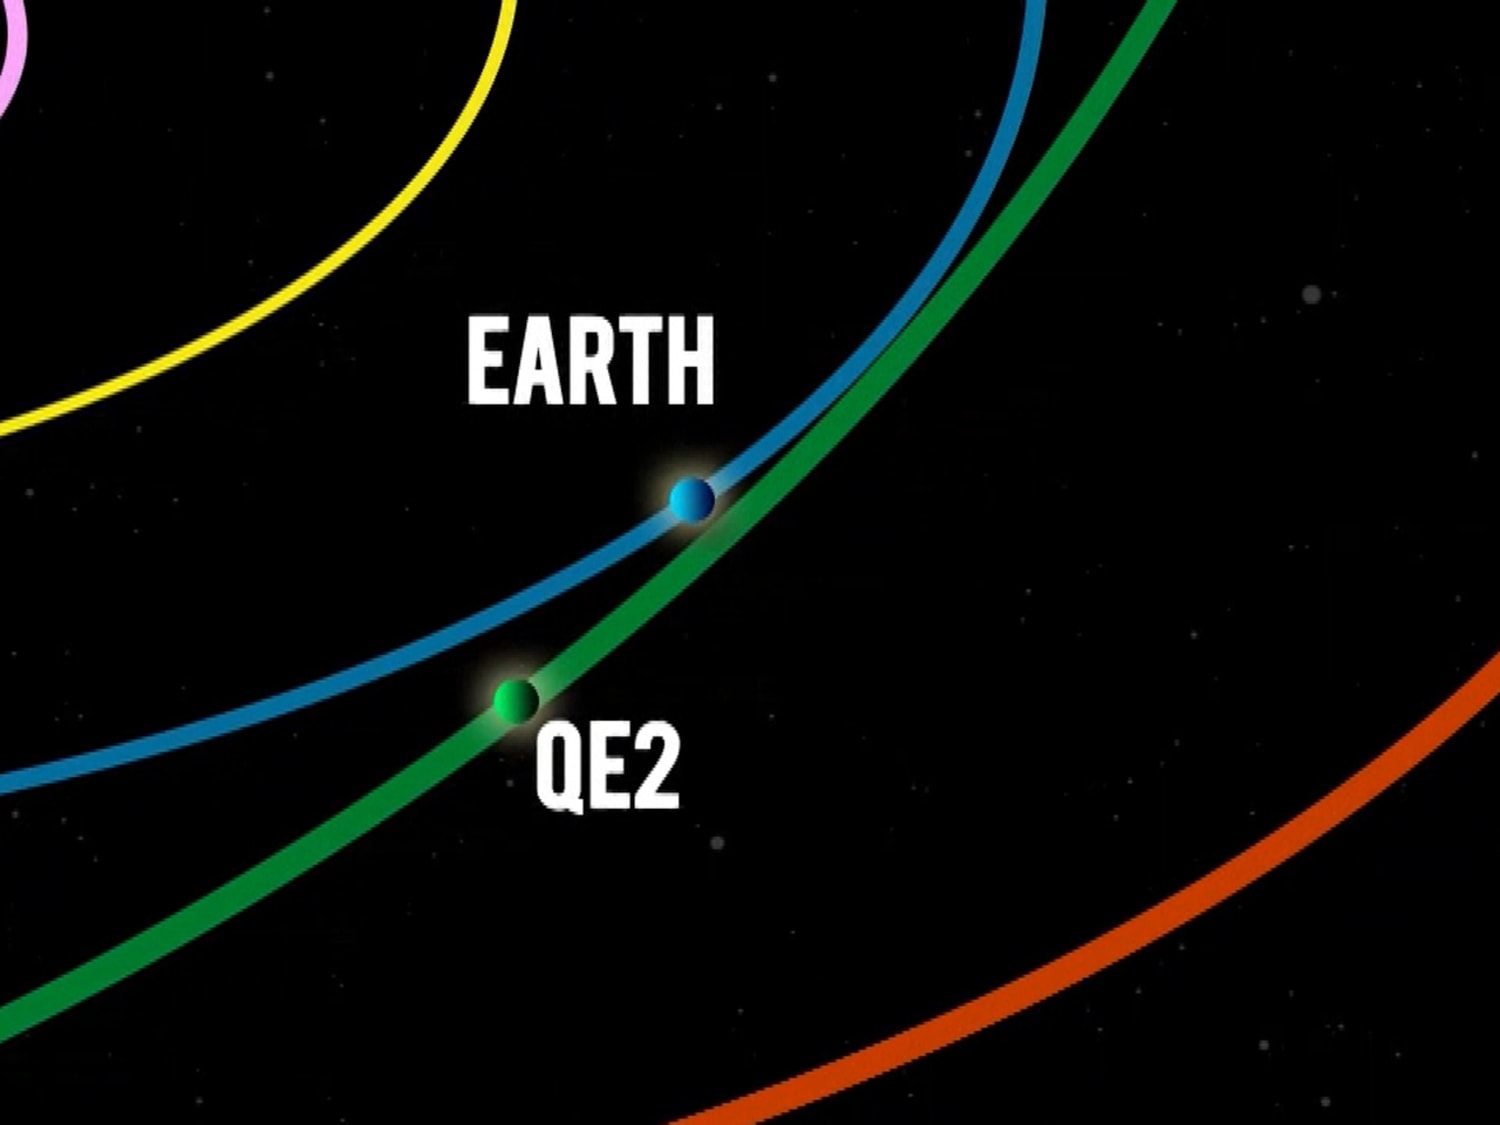 Bigger than an ocean liner, asteroid 1998 QE2 will zip by Earth this month